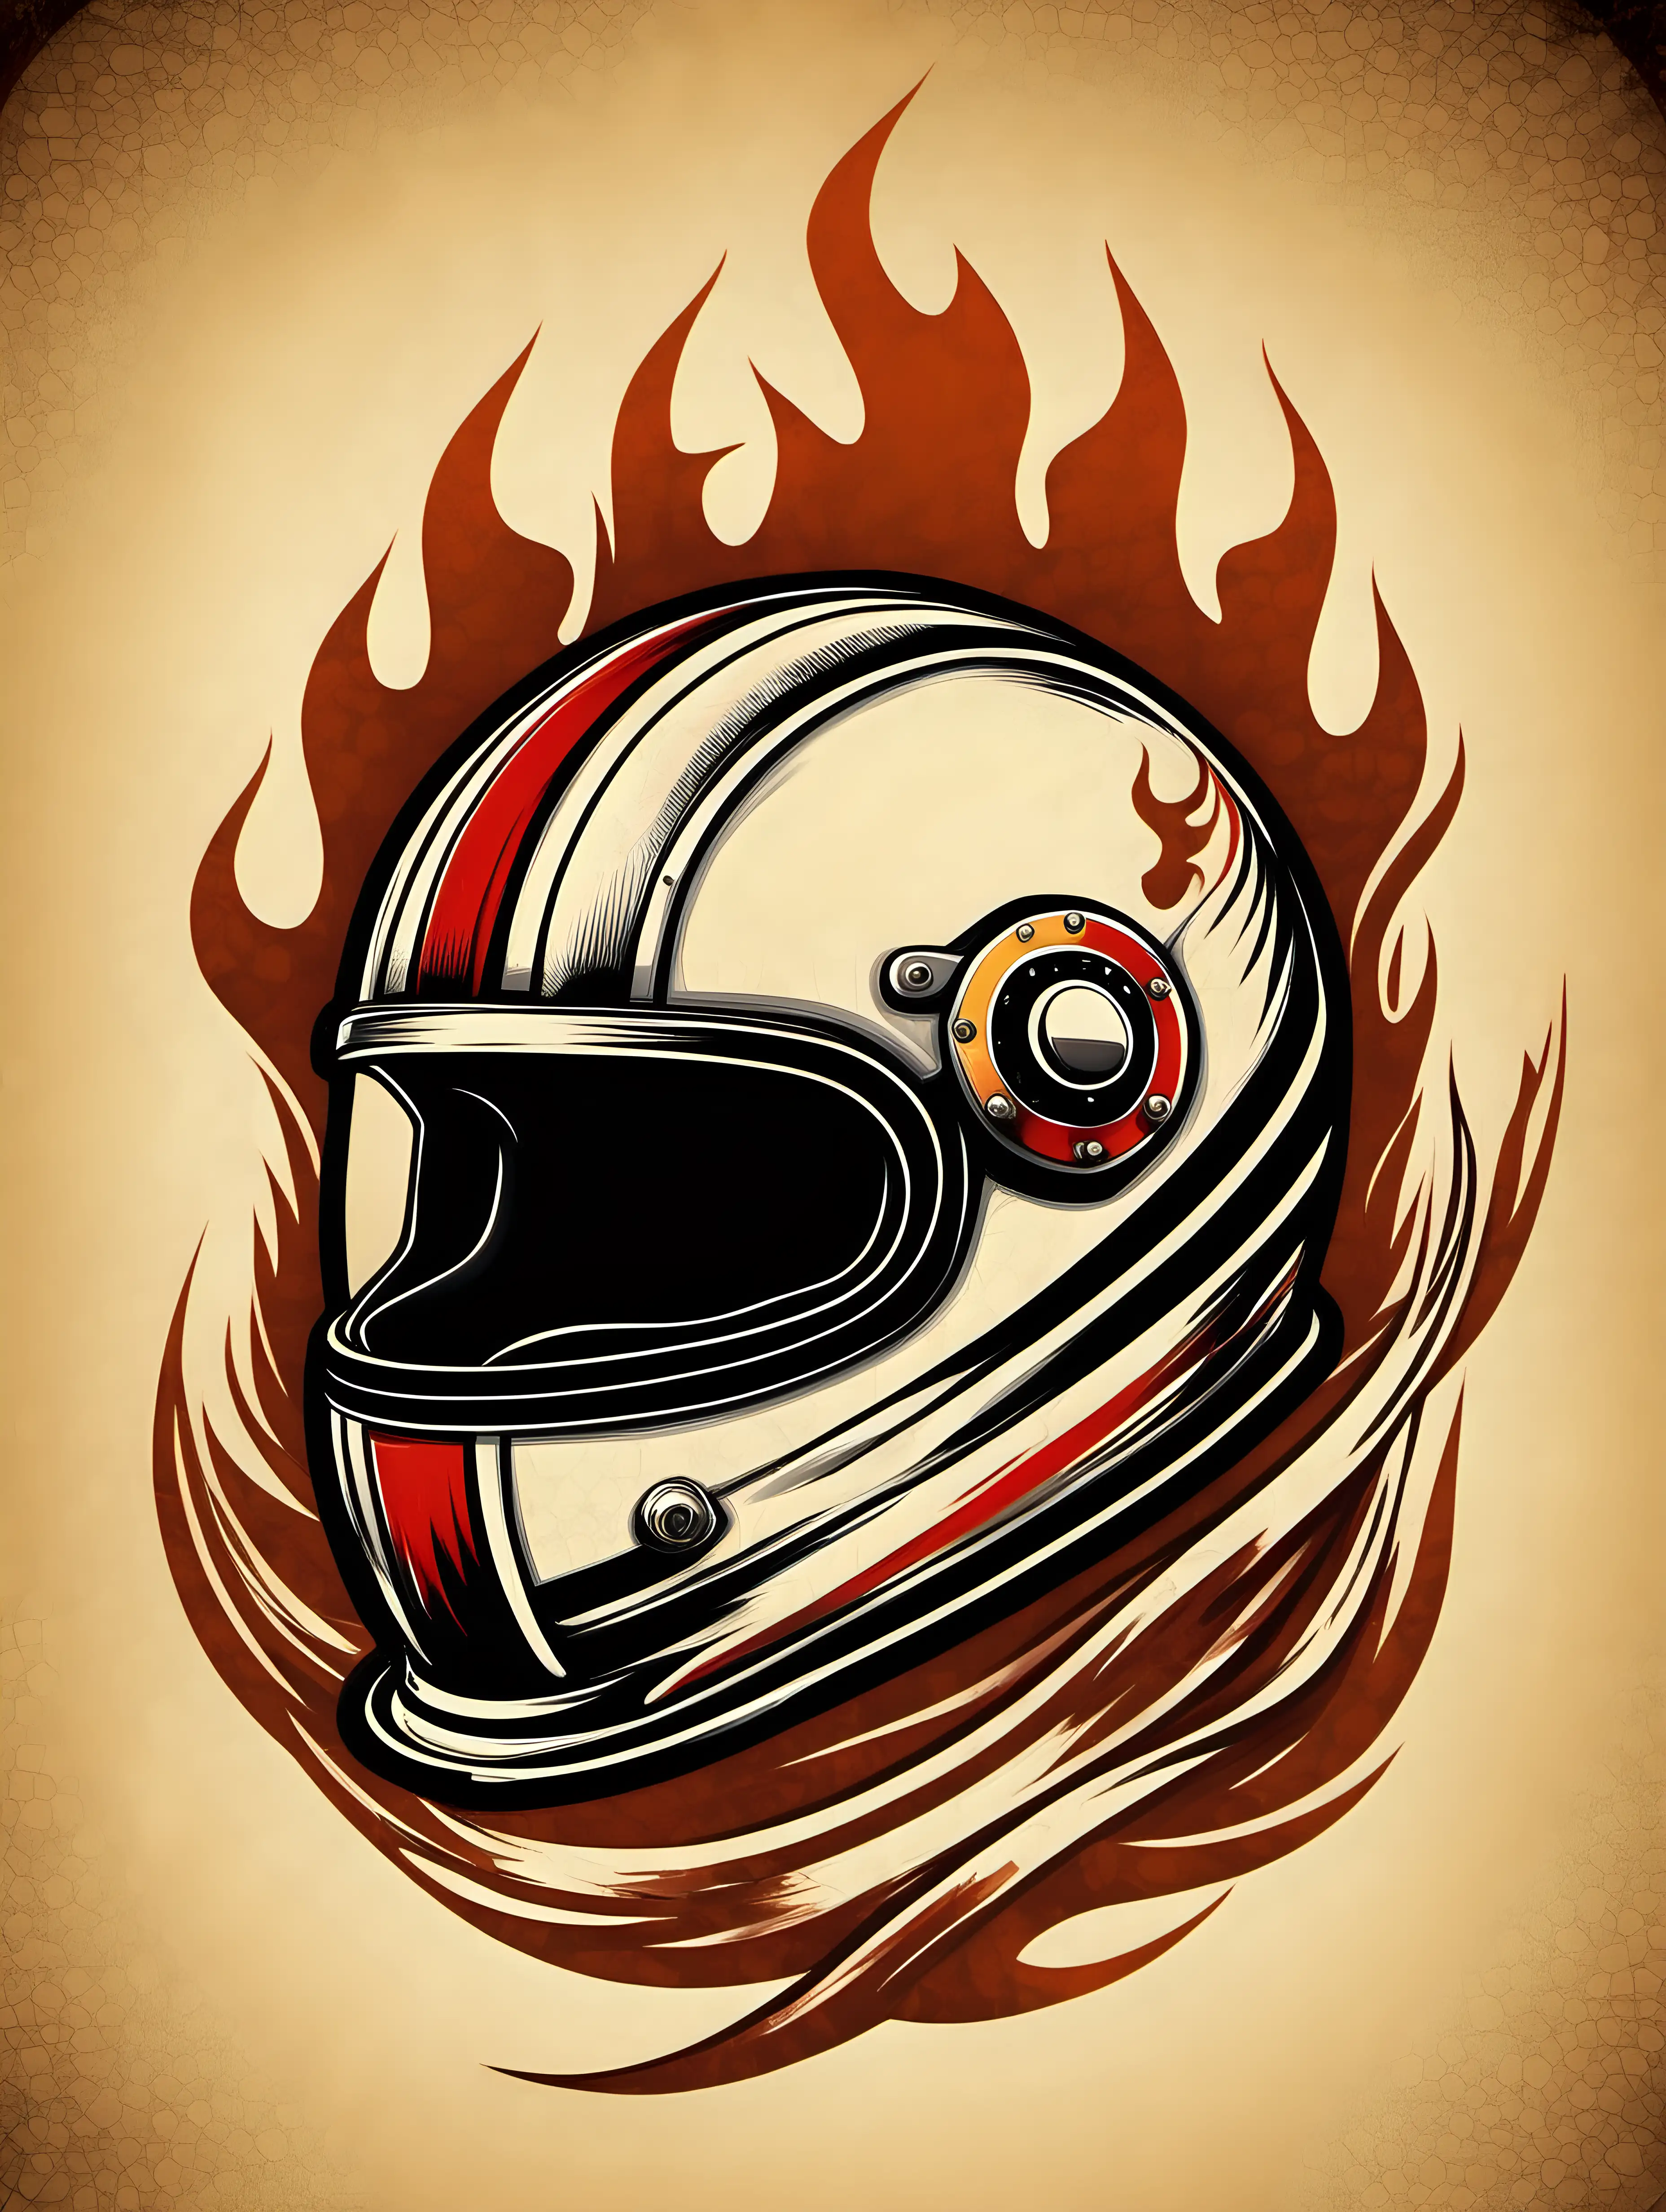 VintageStyle Racing Helmet Drawing with Flag and Flames